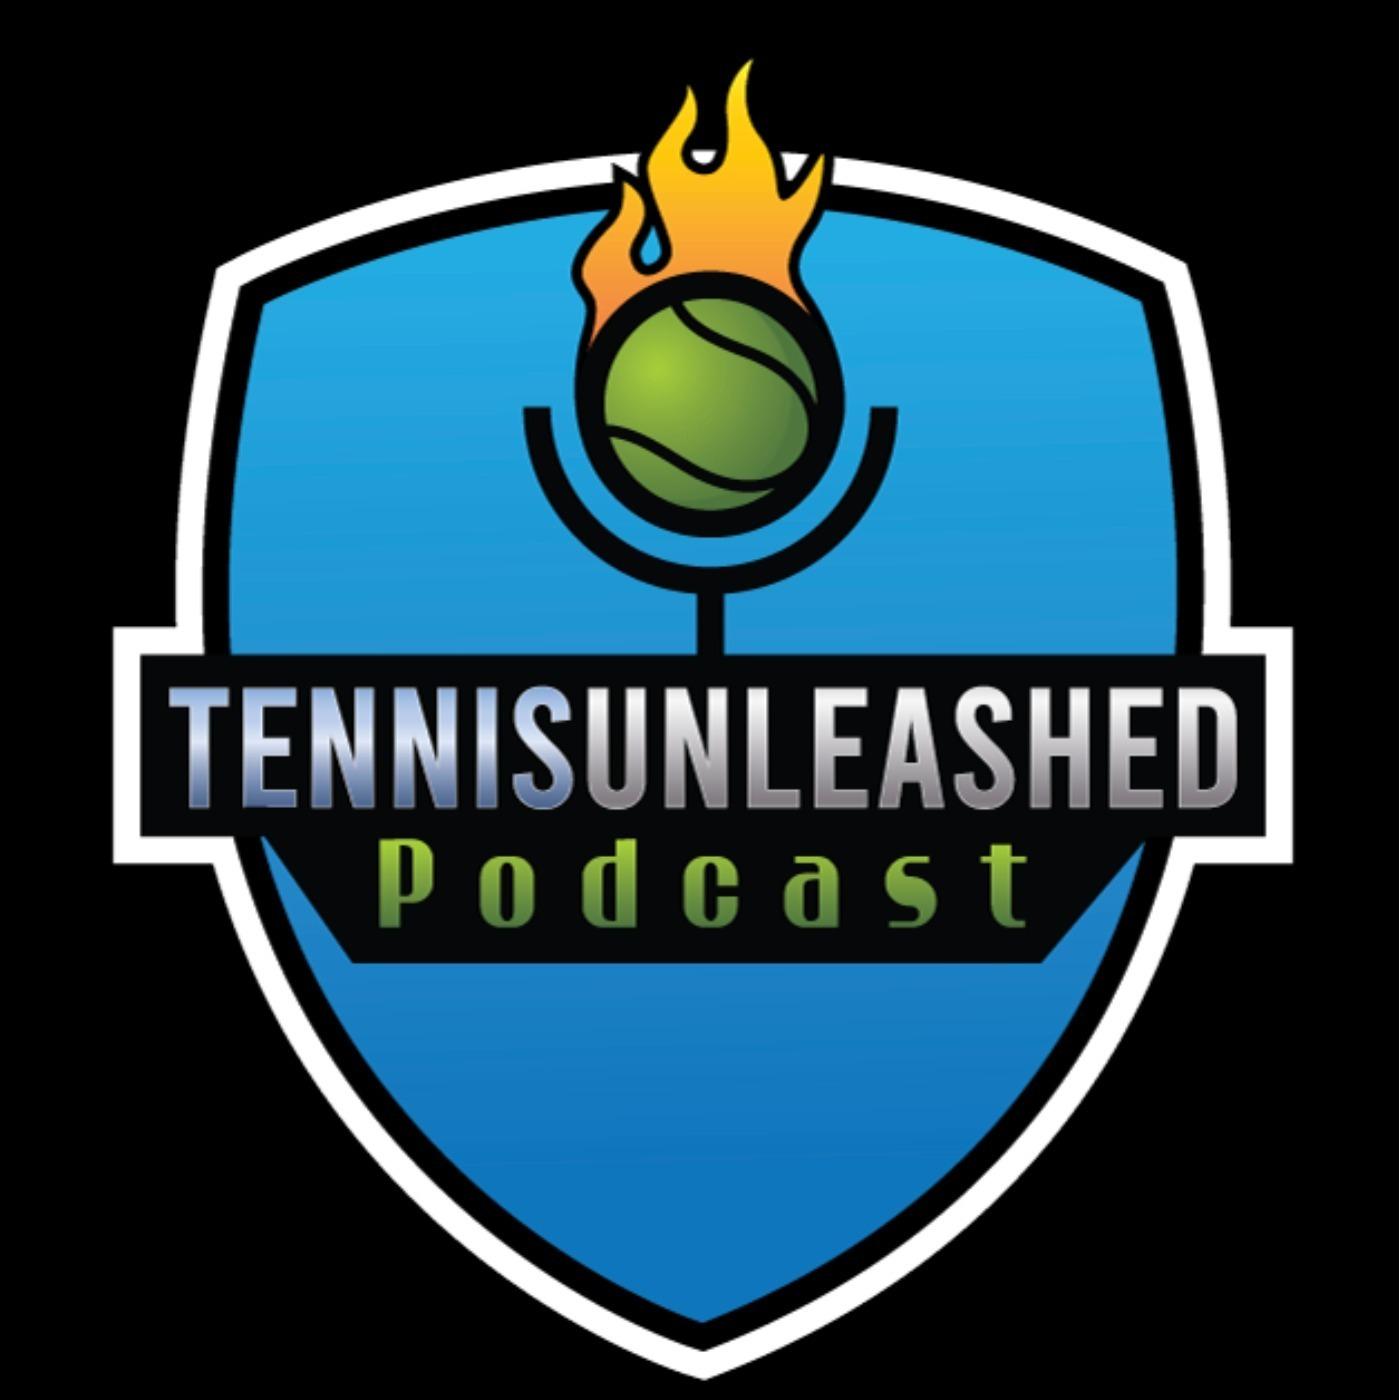 The TennisUnleashed Podcast